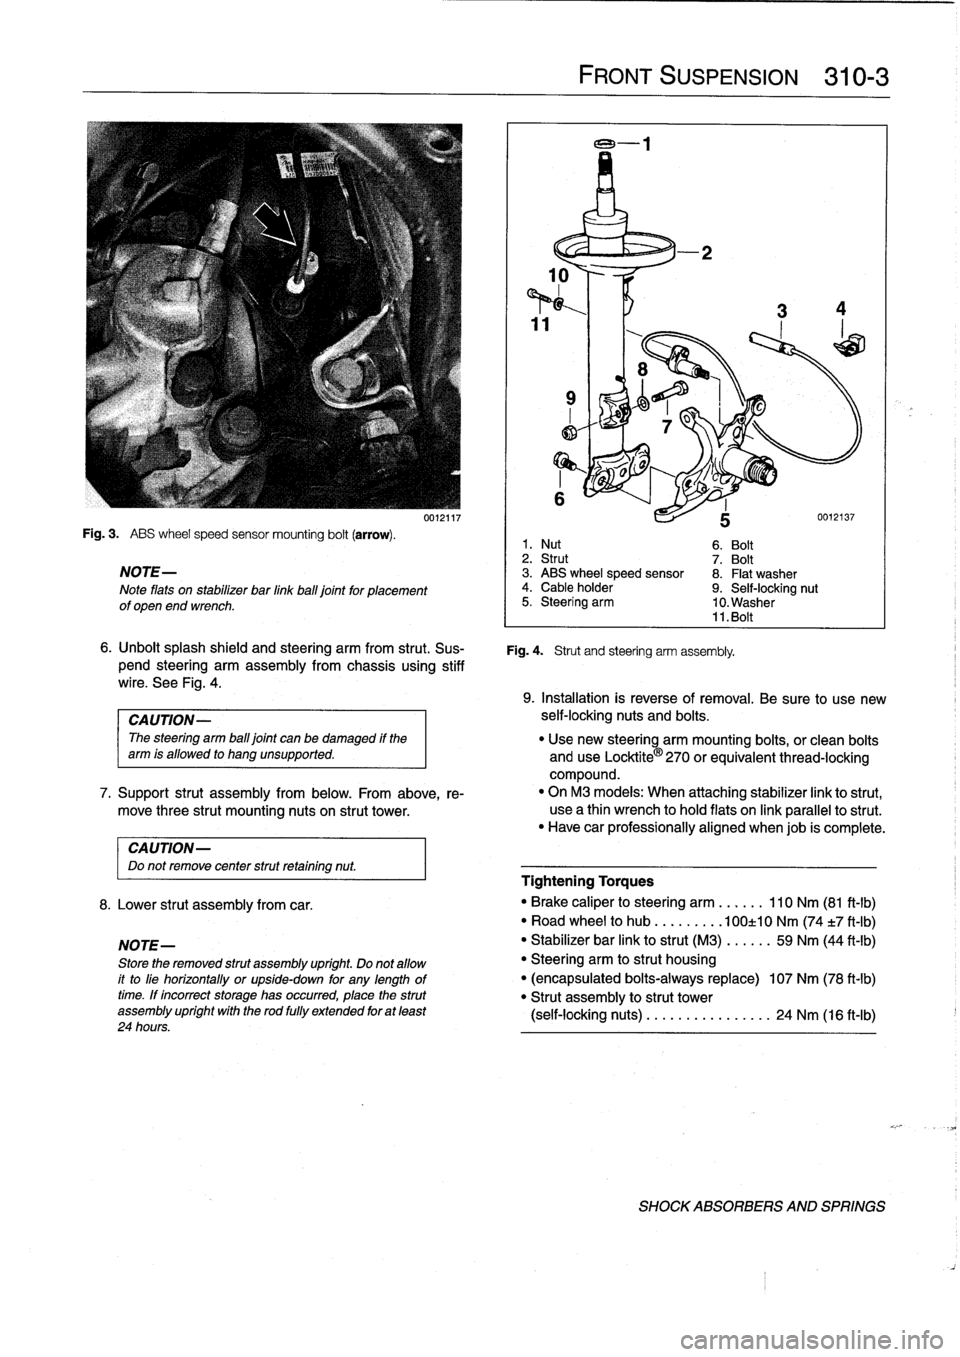 BMW 318i 1995 E36 Owners Manual 
Fig
.
3
.

	

ABS
wheel
speed
sensor
mounting
bolt
(arrow)
.

NOTE-

Note
flats
on
stabilizer
bar
linkball
joint
for
placement
of
open
end
wrench
.

CAUTION-
Do
not
remove
center
strut
retaining
nut
